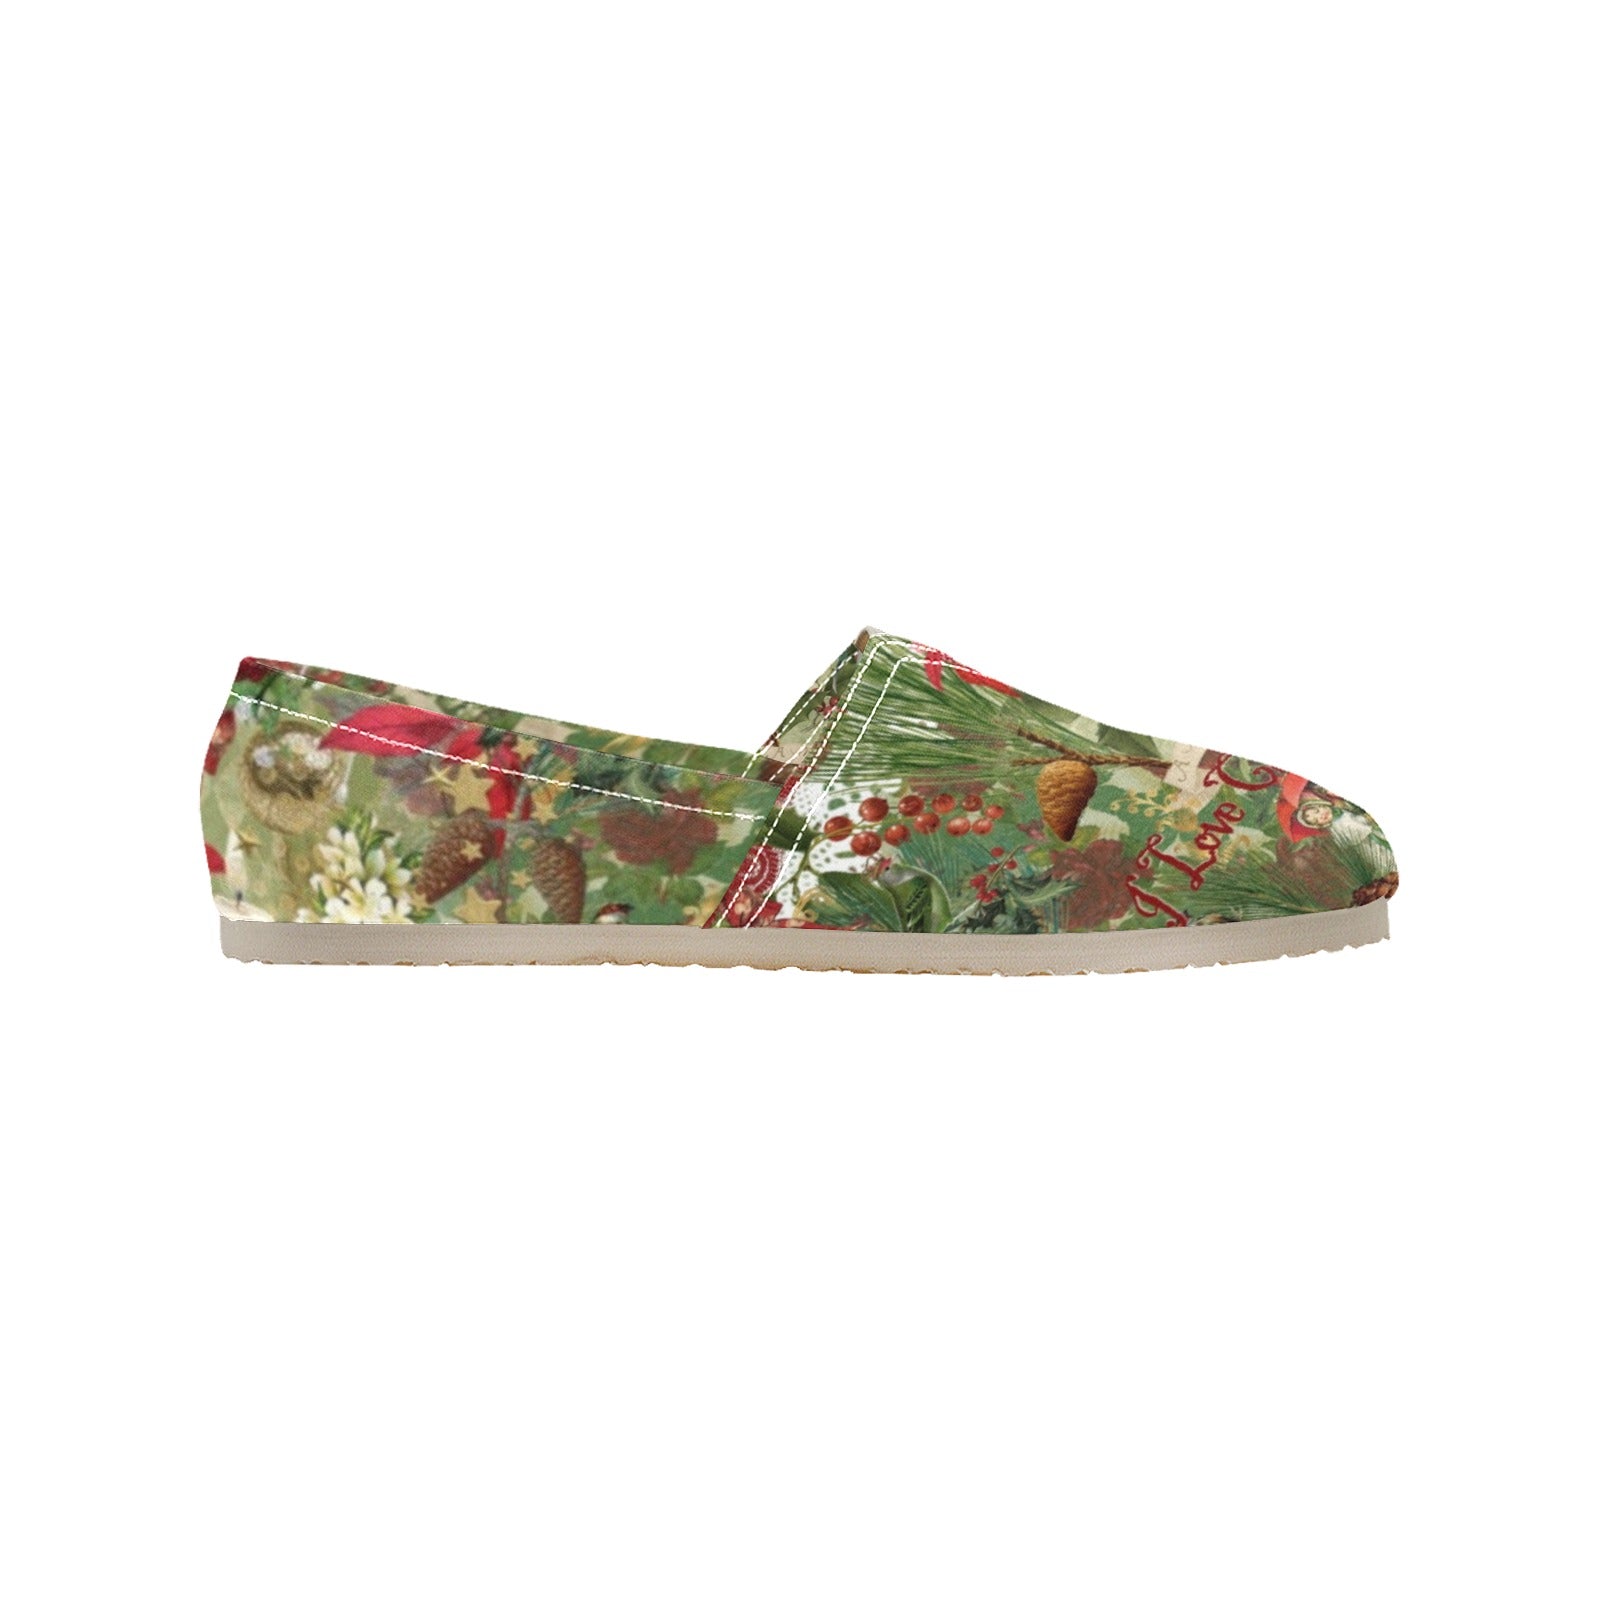 Vintage Xmas - Casual Canvas Slip-on Shoes